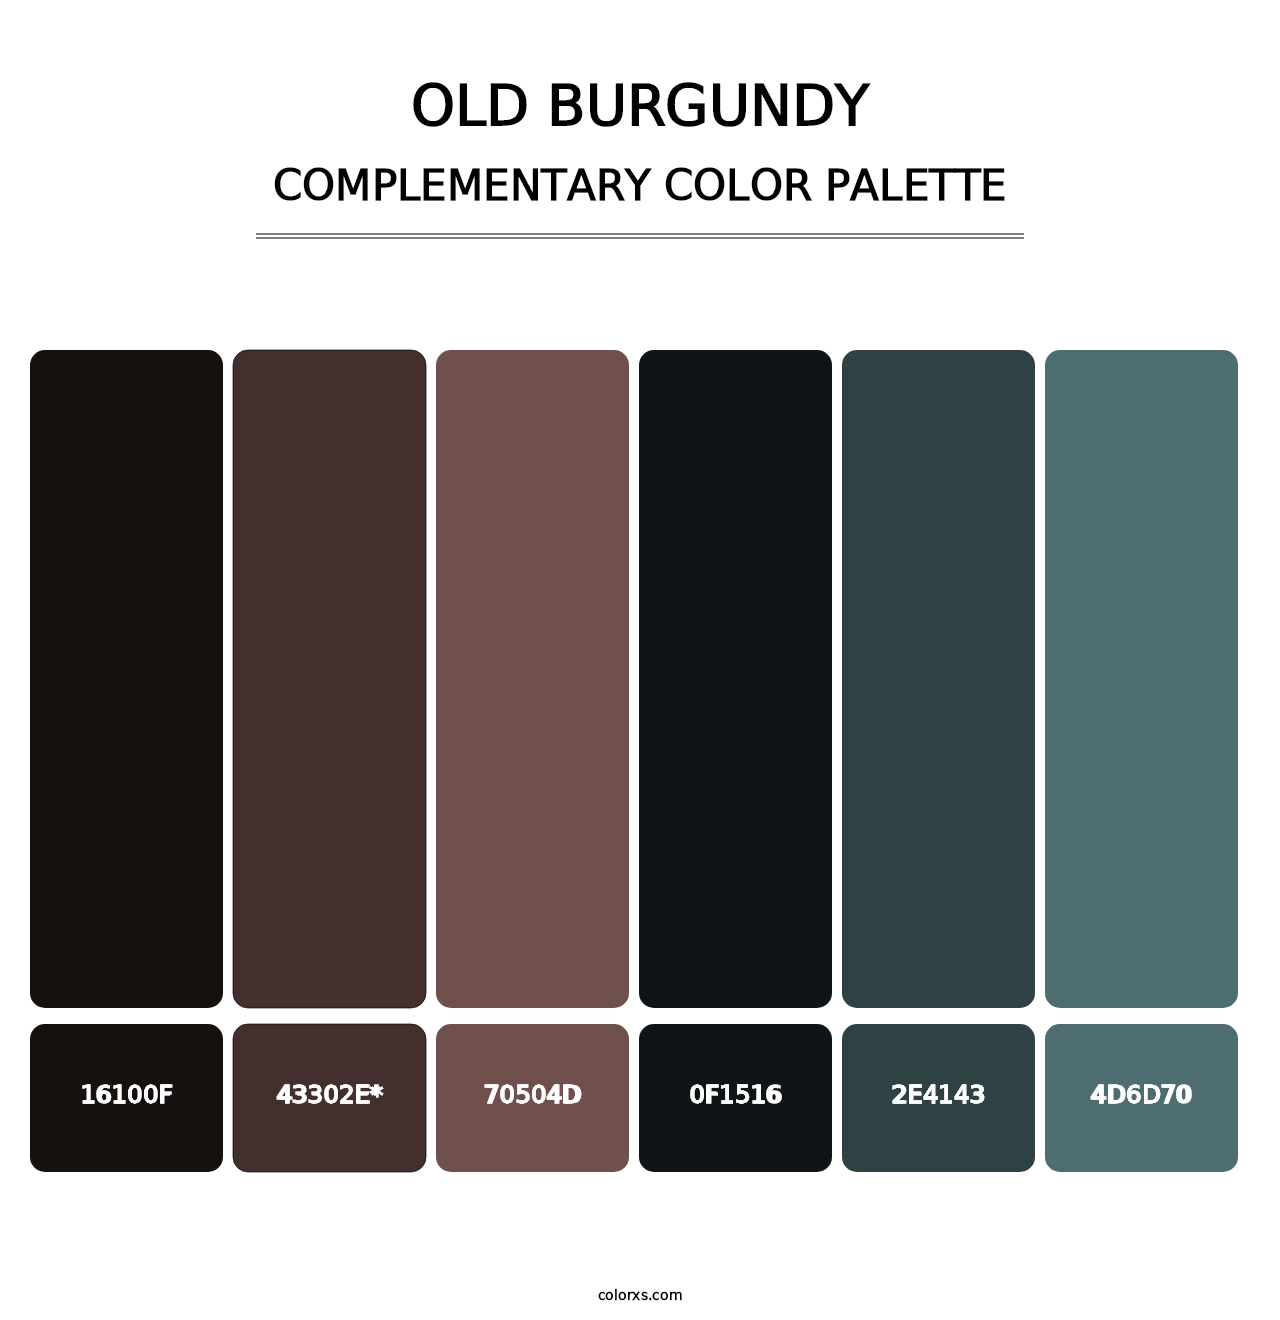 Old Burgundy - Complementary Color Palette